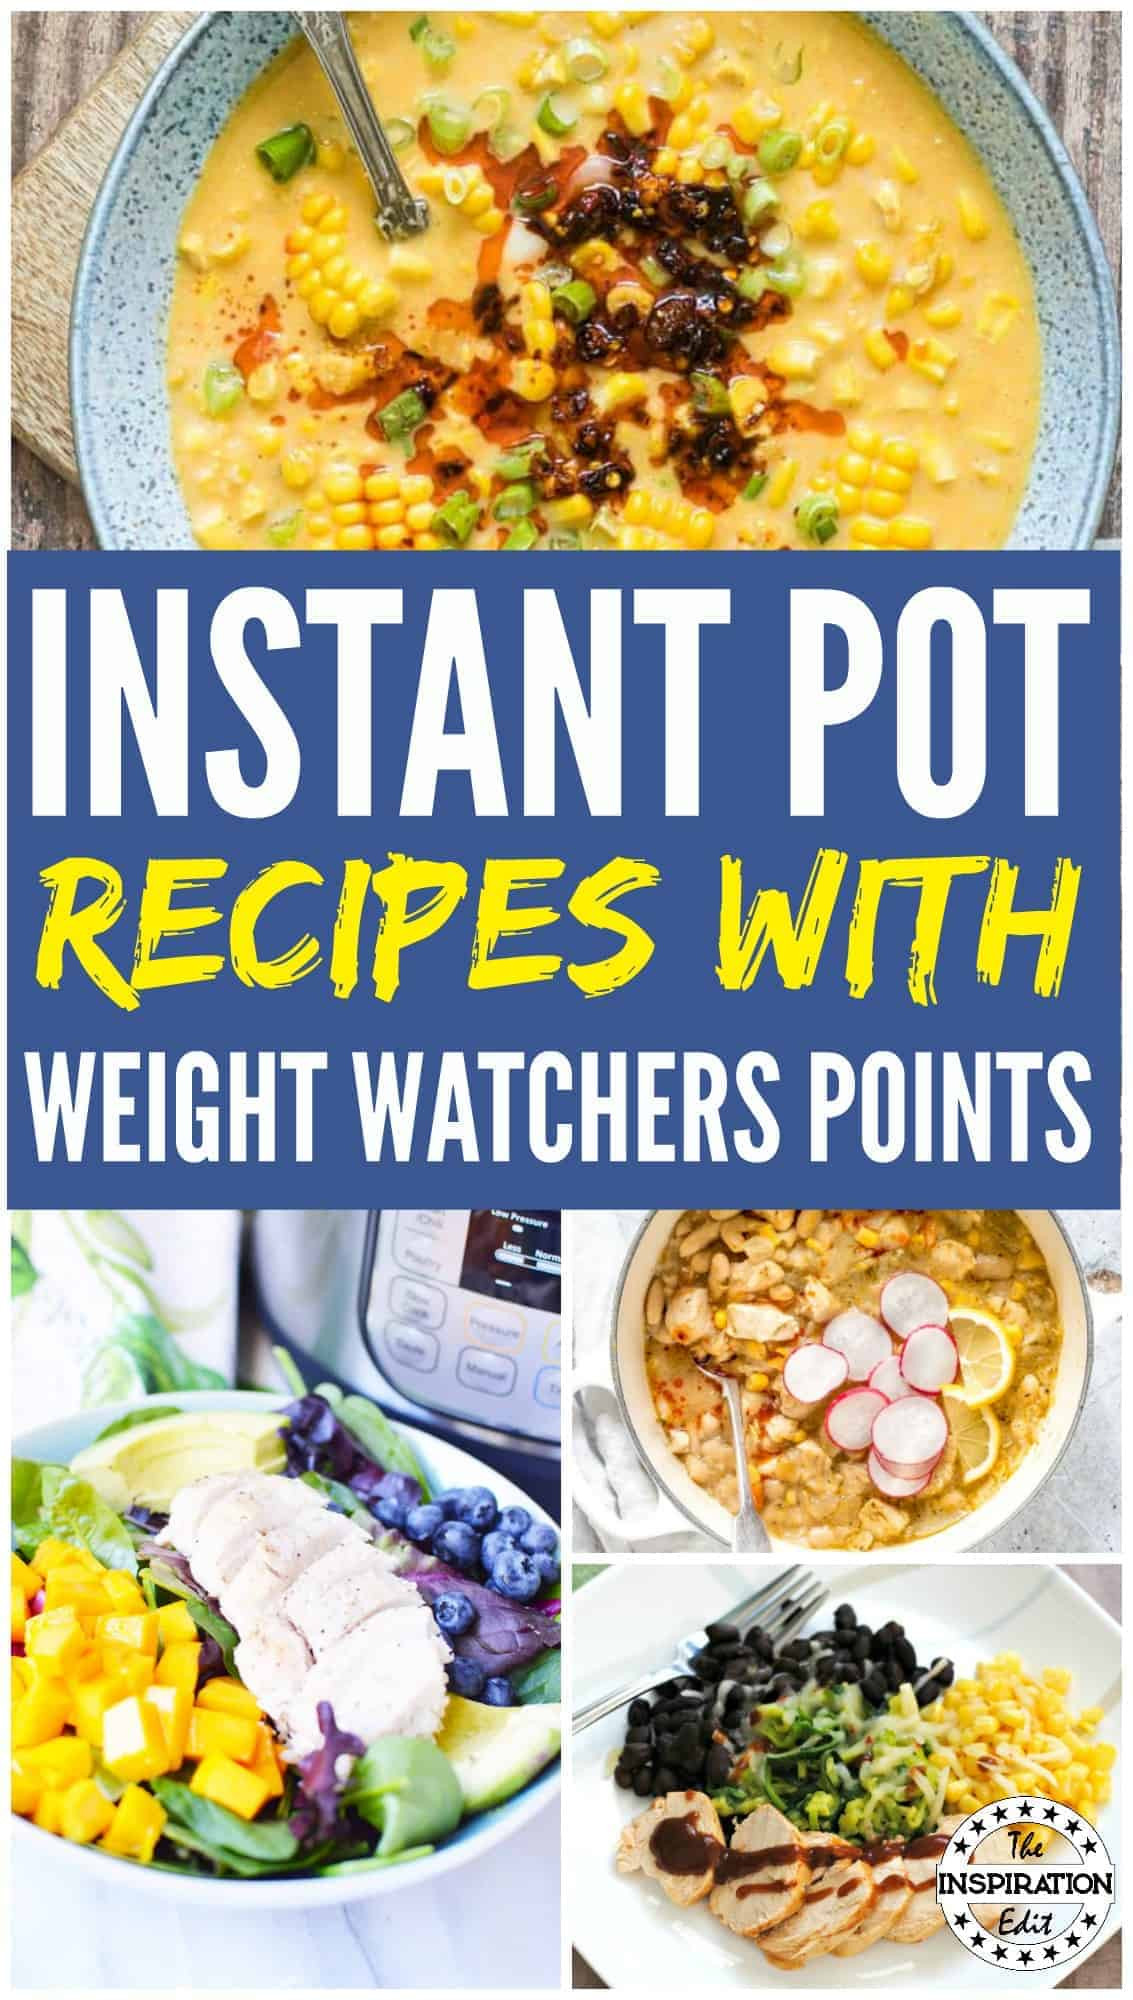 Weight Watcher Instant Pot Recipes Awesome Weight Watchers Instant Pot Recipes · the Inspiration Edit